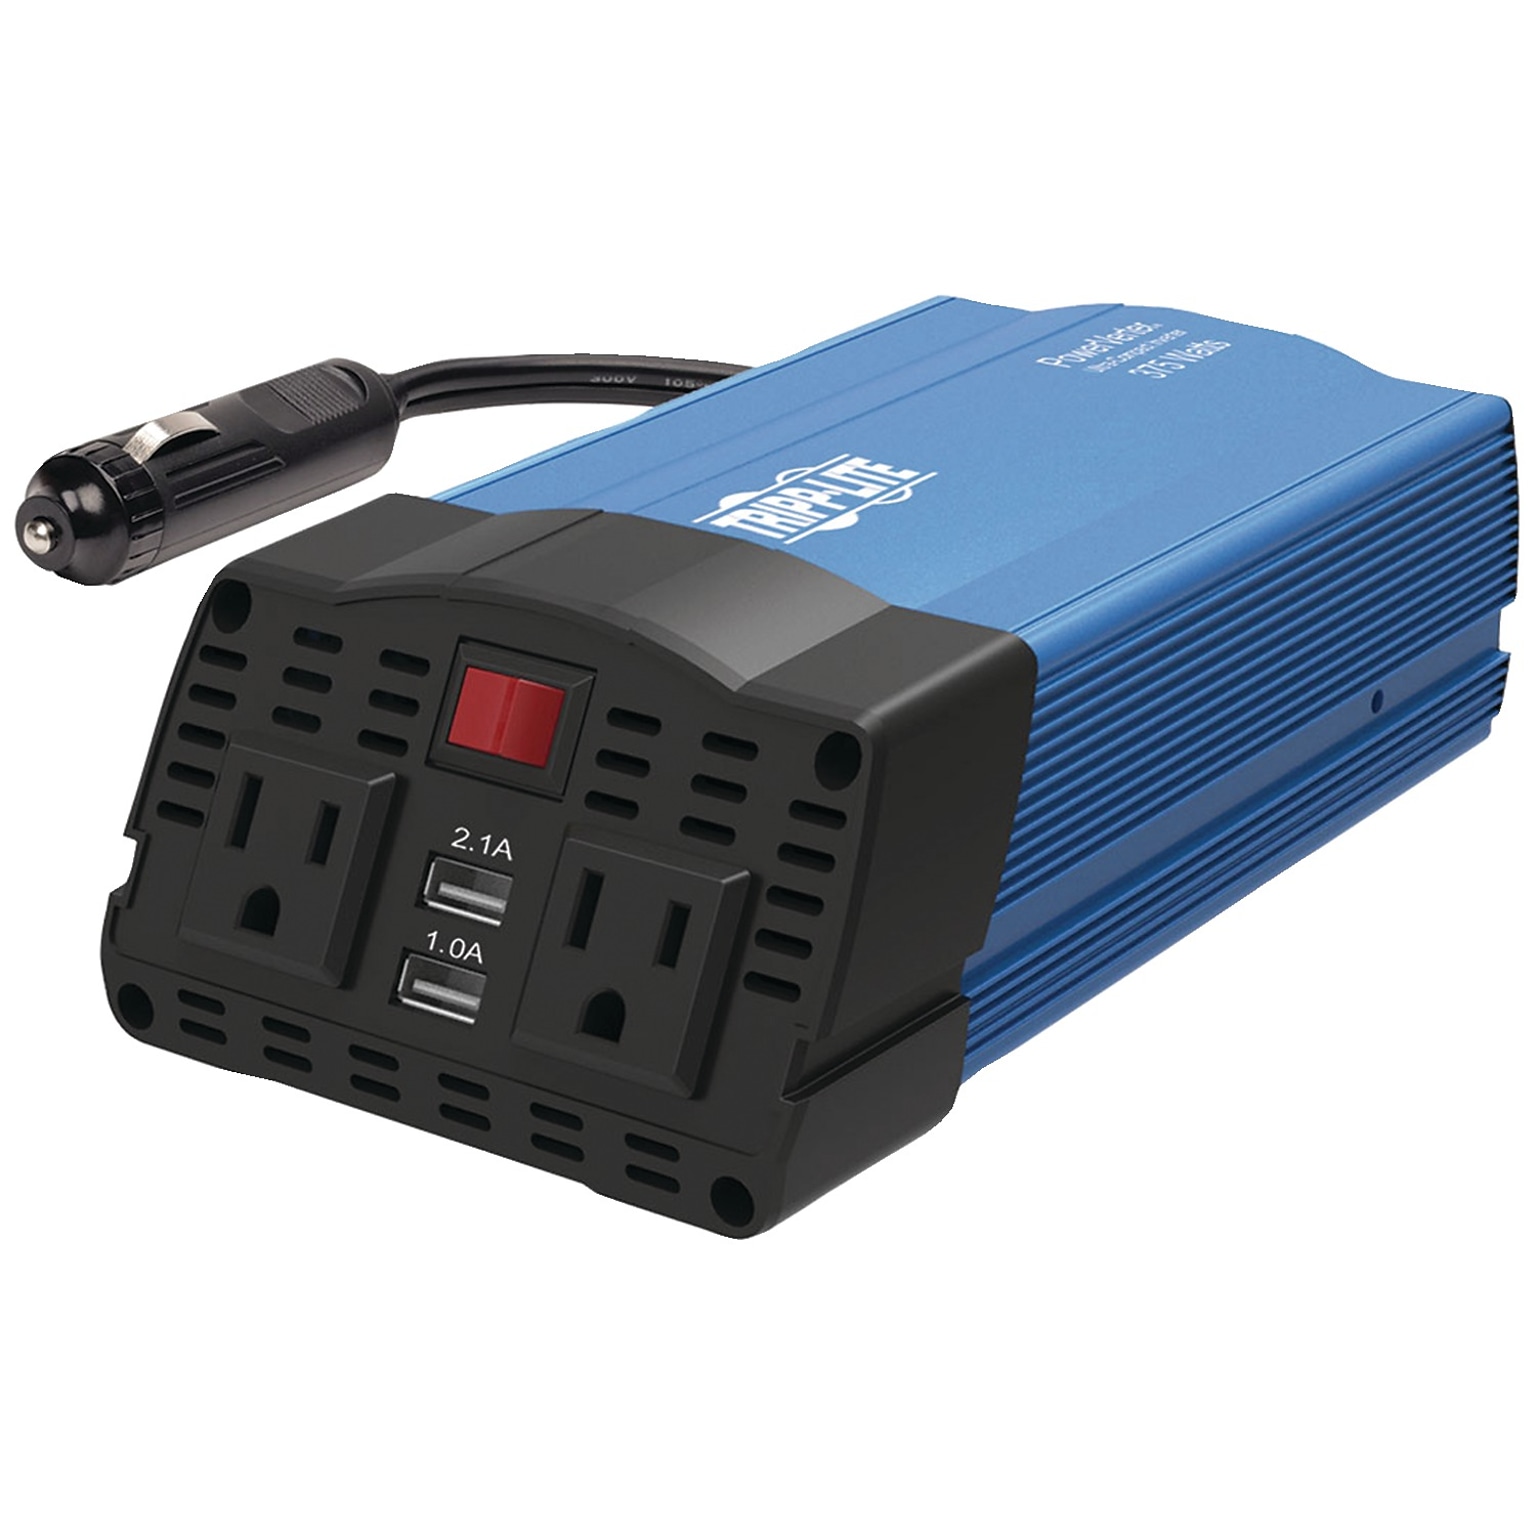 Tripp Lite 375-Watt-Continuous PowerVerter Ultracompact Car Inverter with USB & Battery Cables  (PV375USB)